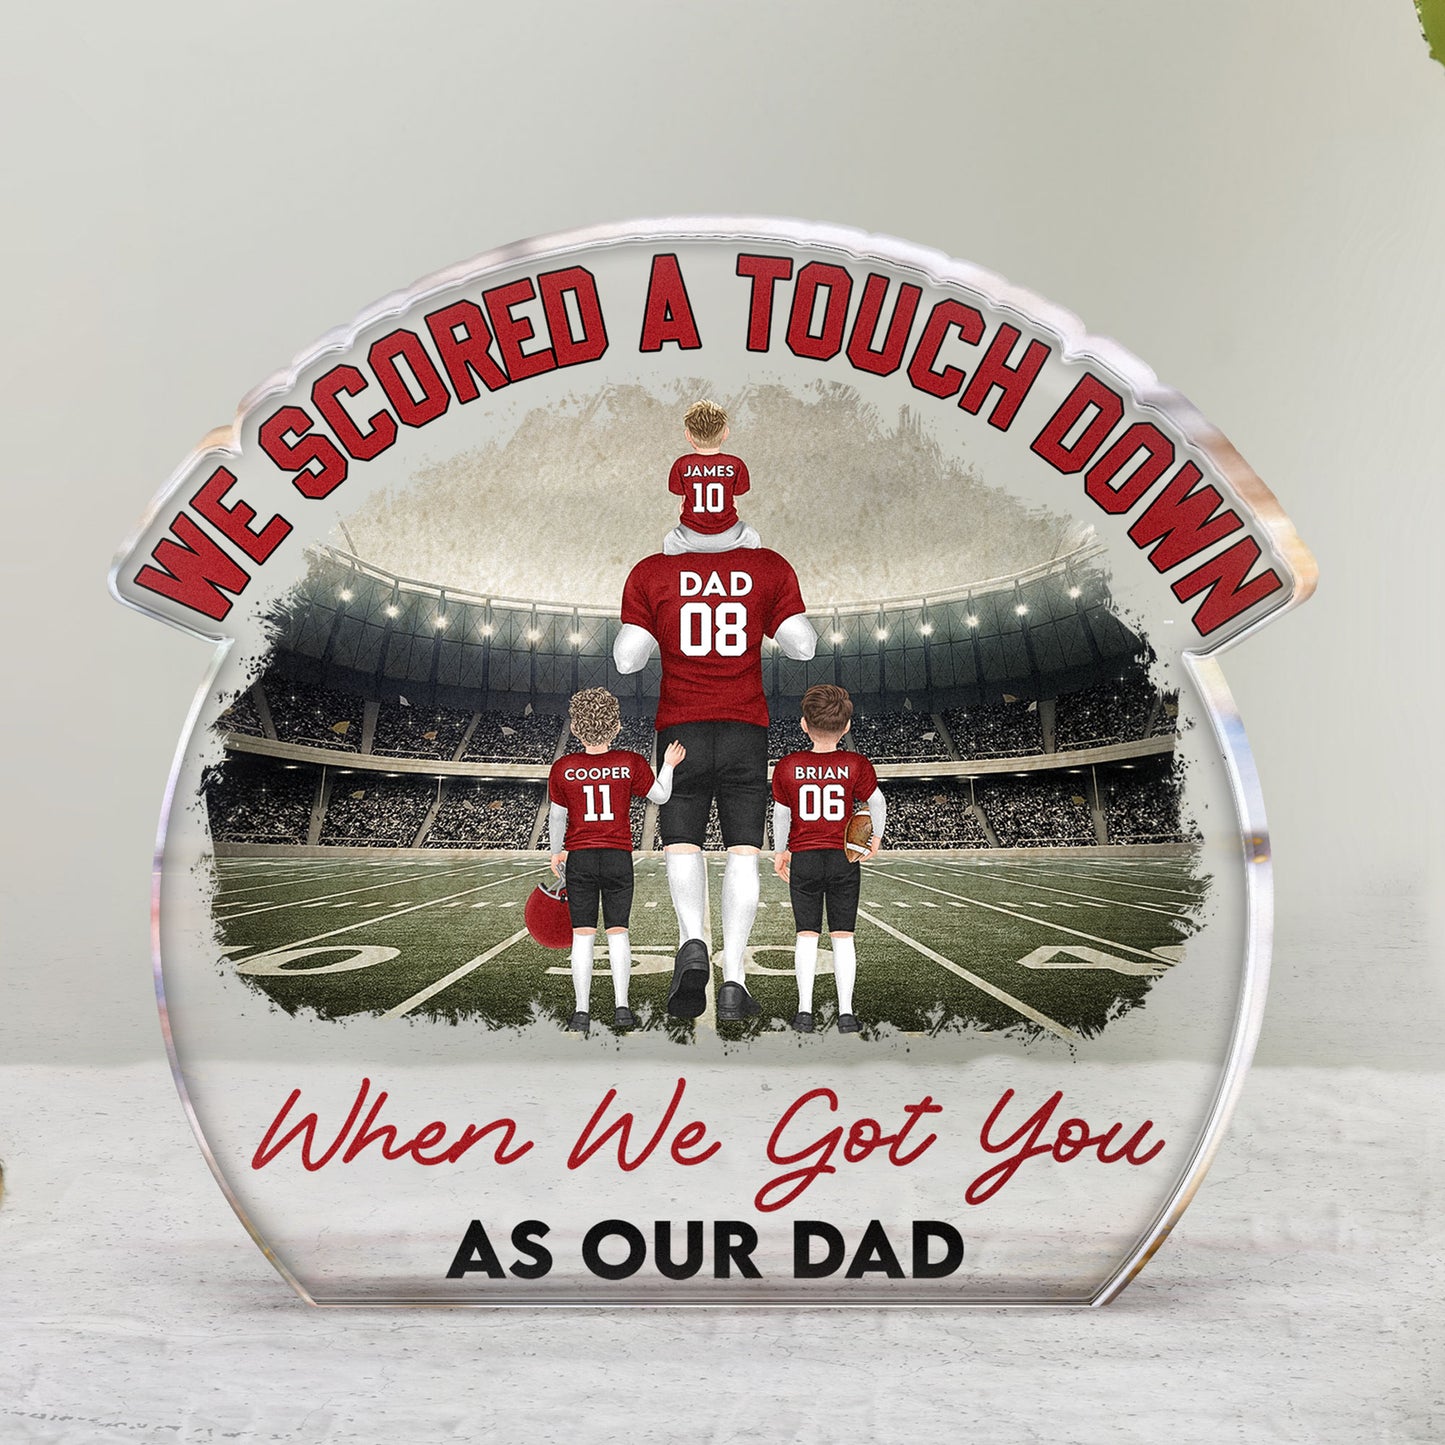 We Scored A Touch Down - Personalized Acrylic Plaque